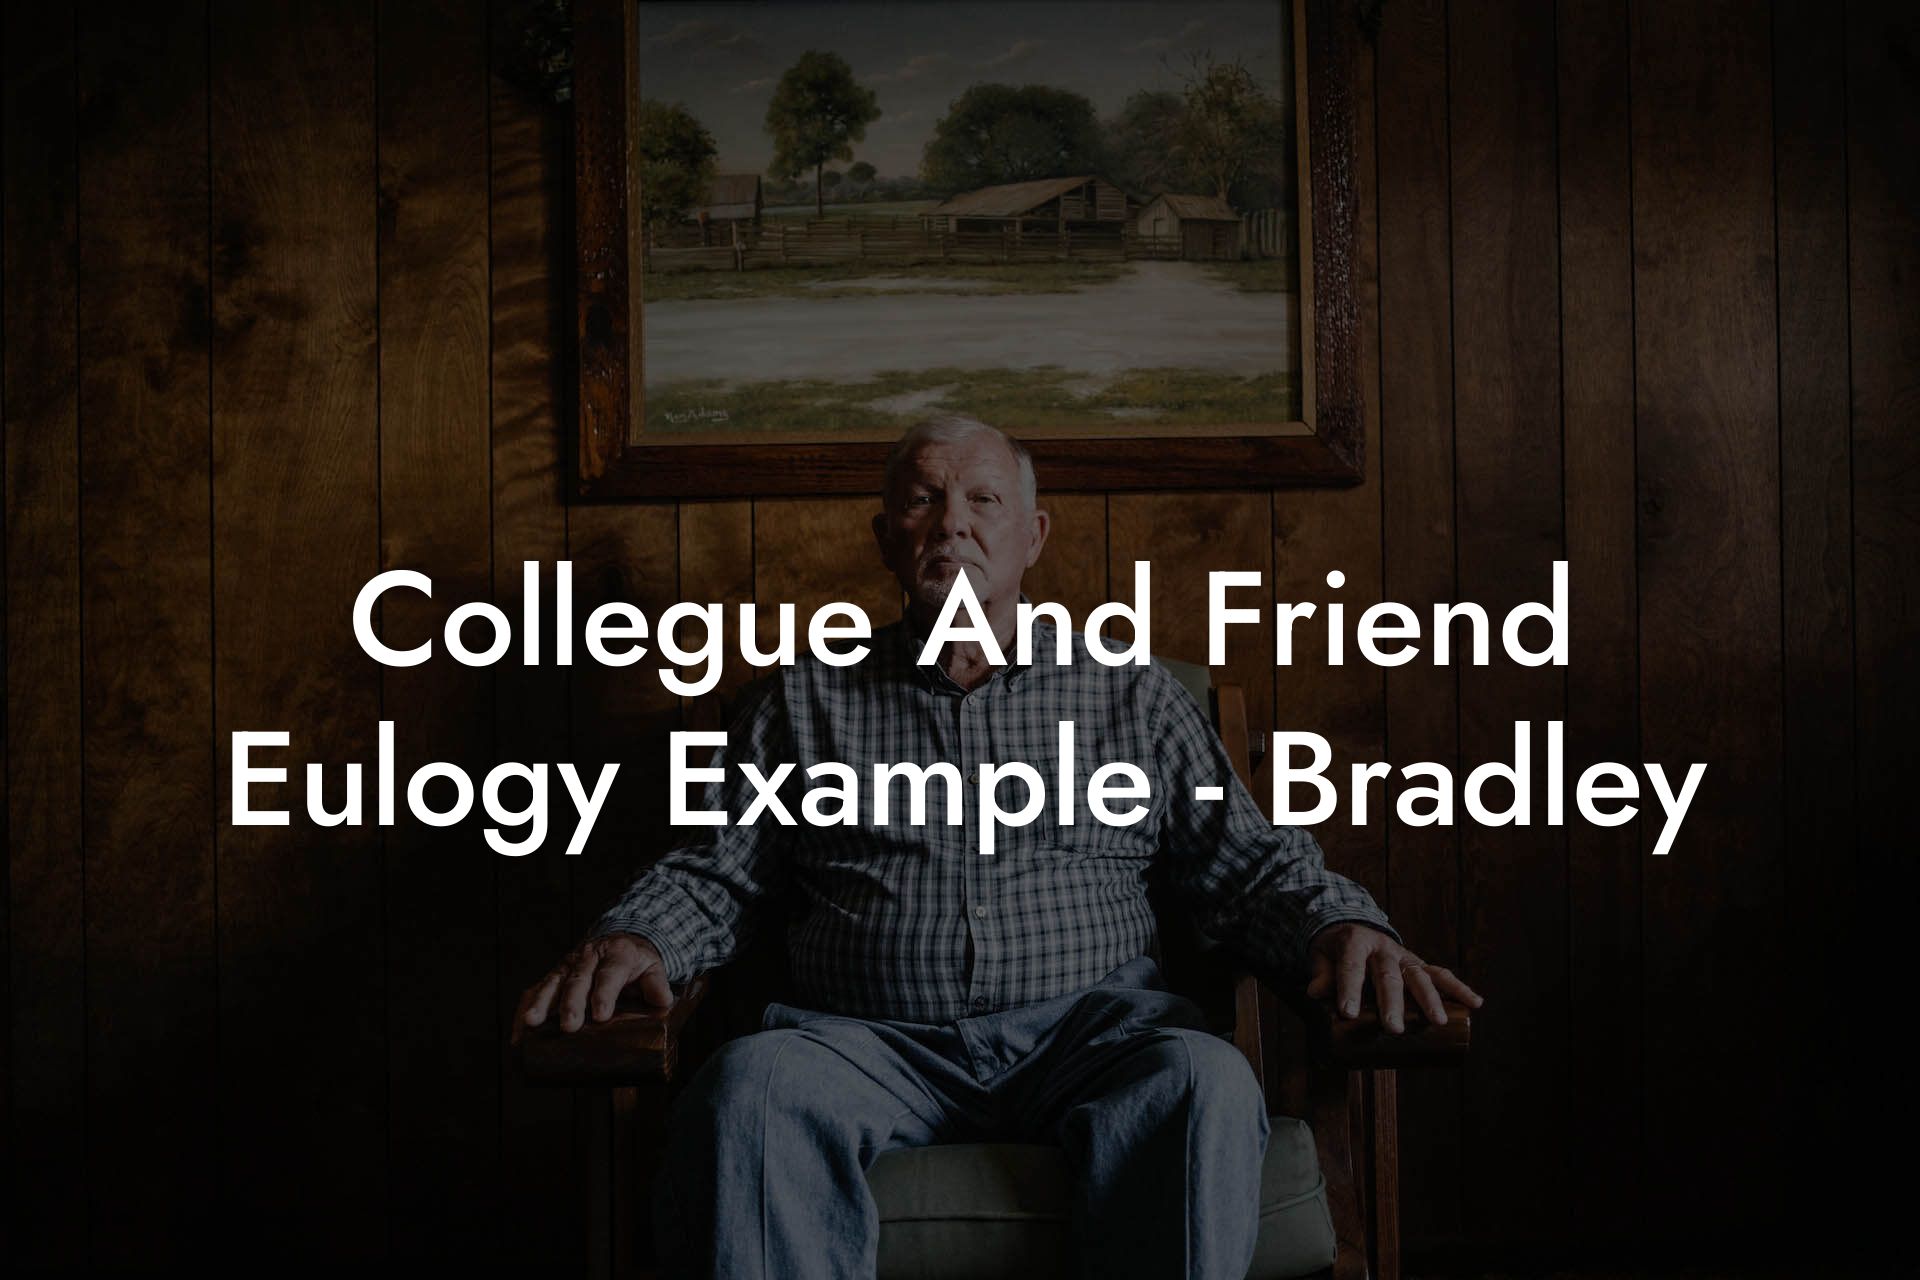 Collegue And Friend Eulogy Example - Bradley